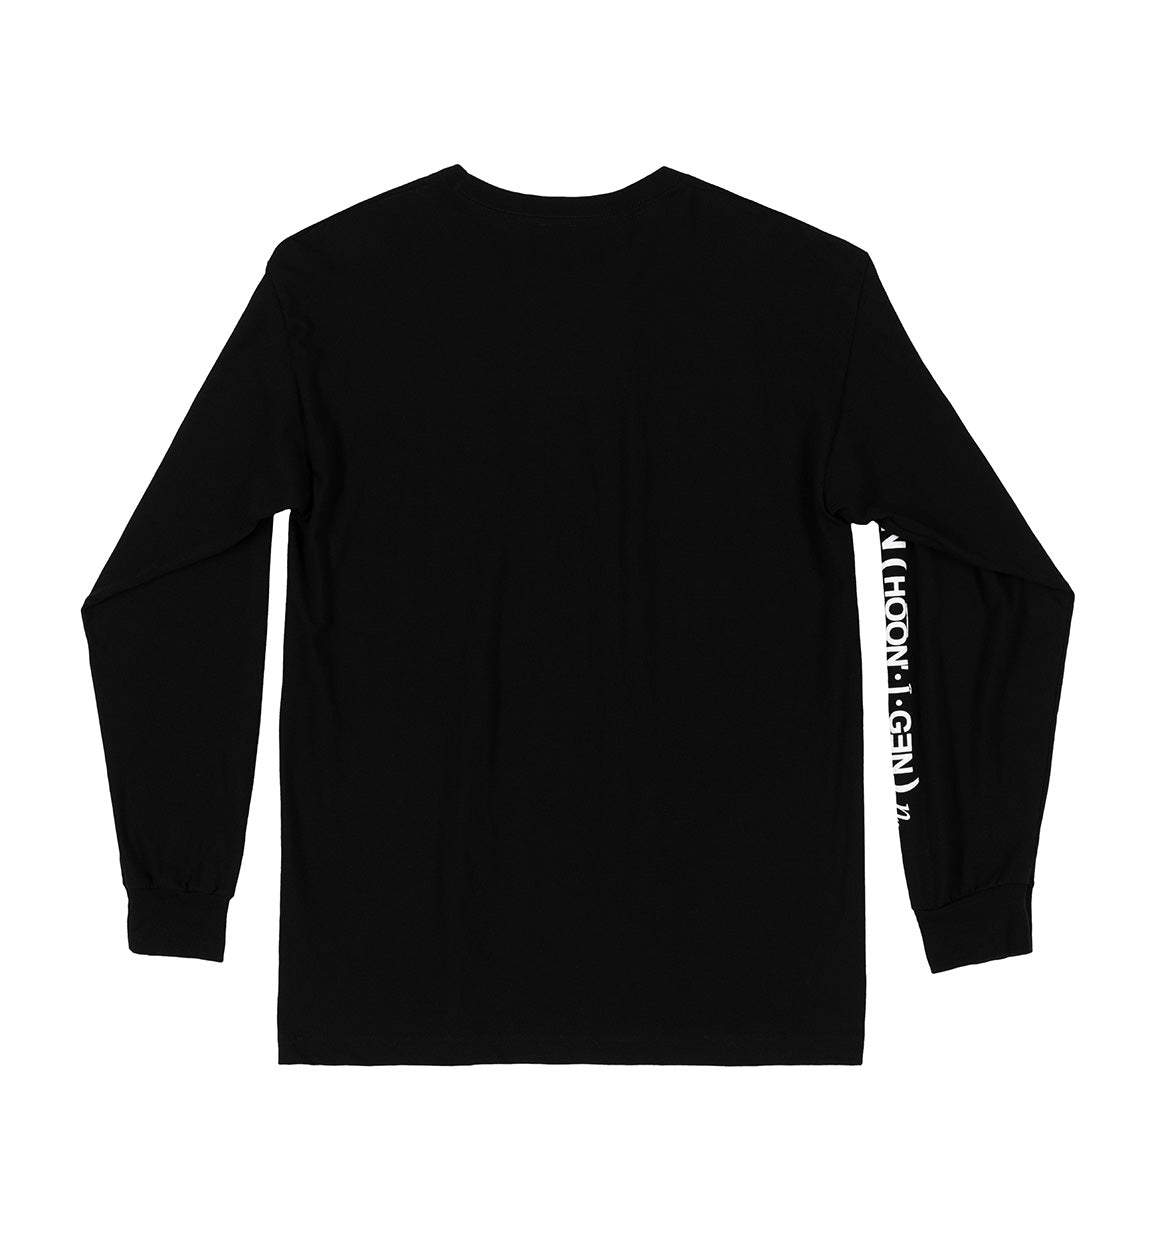 DEFINITION long sleeve